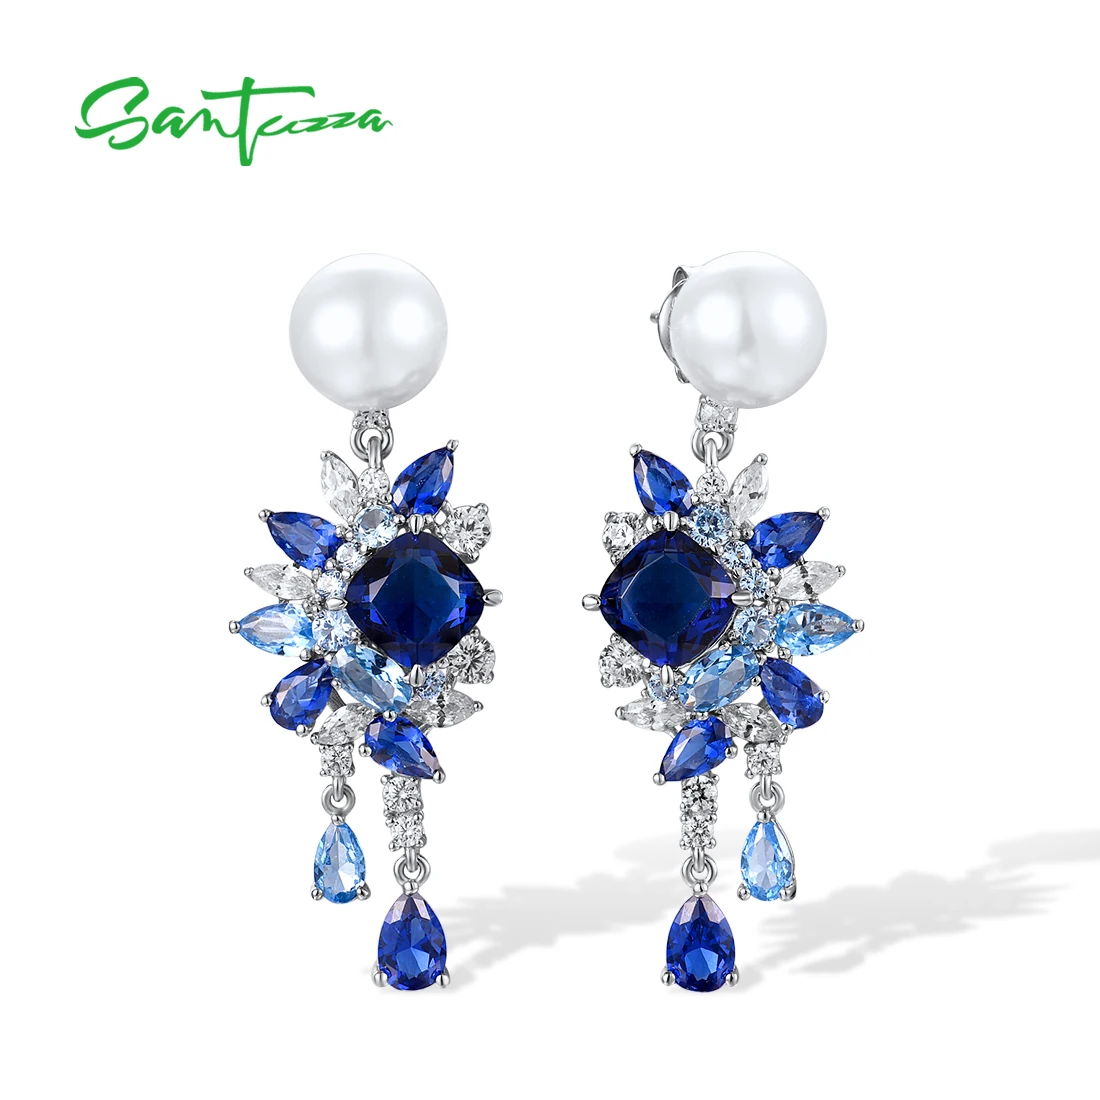 

SANTUZZA Authentic 925 Sterling Silver Drop Earrings For Women Sparkling Blue Spinel Cluster Gorgeous Party Gifts Fine Jewelry